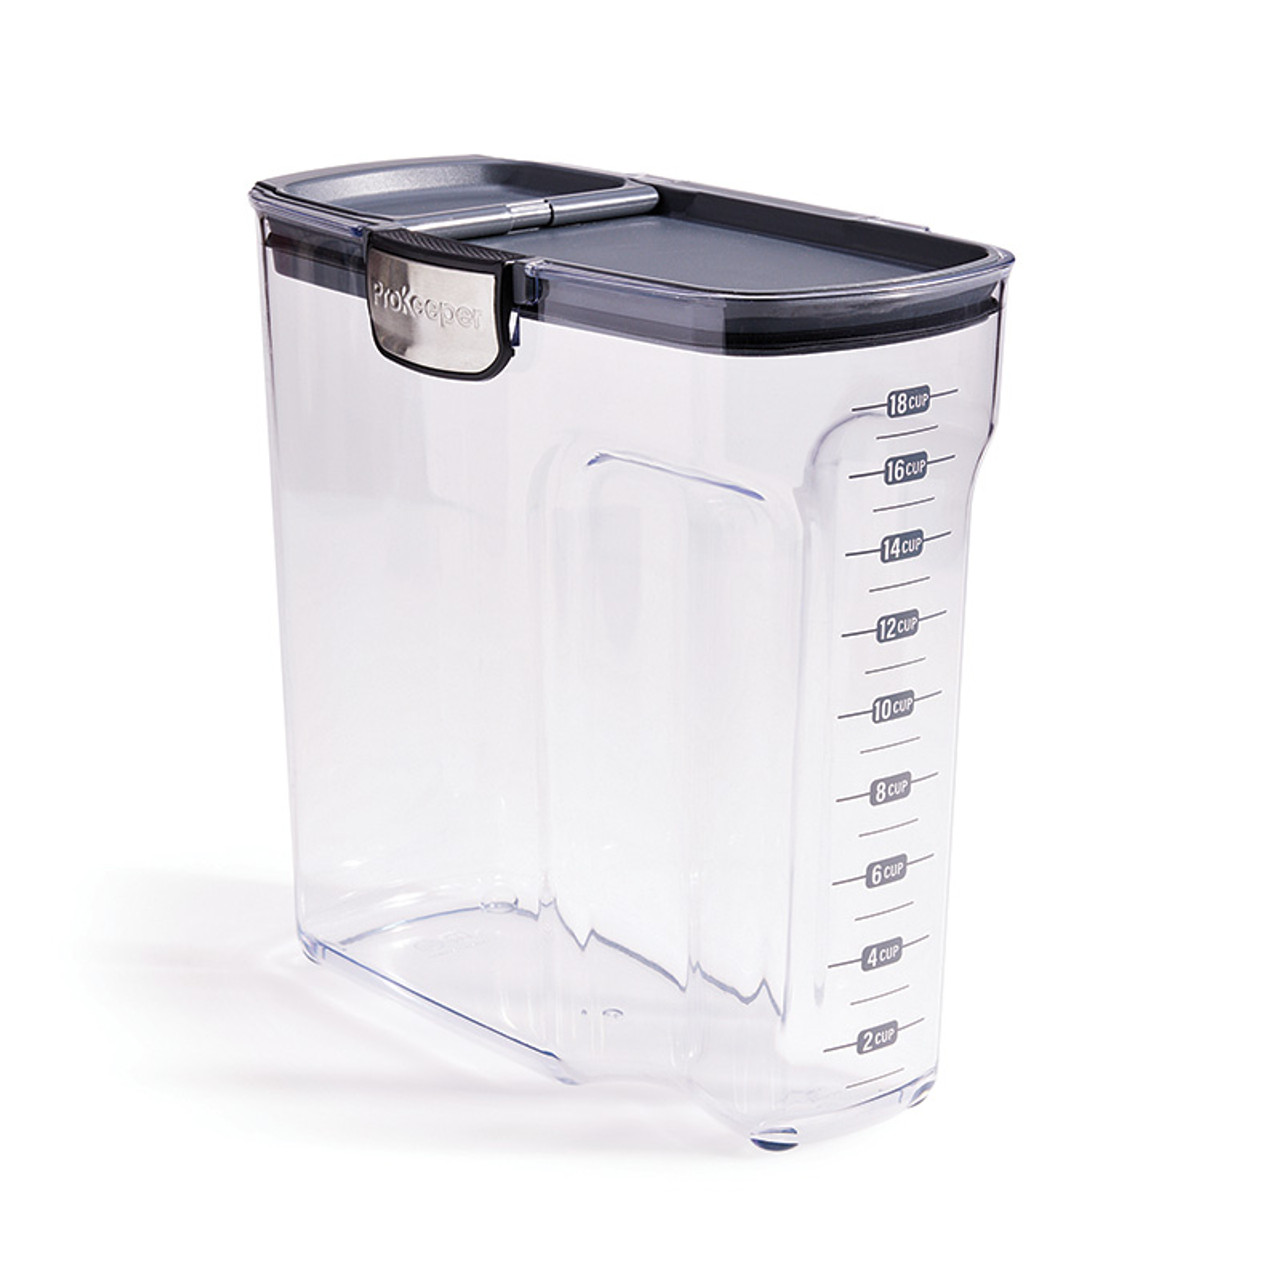 Food Storage Container - King Arthur Baking Company